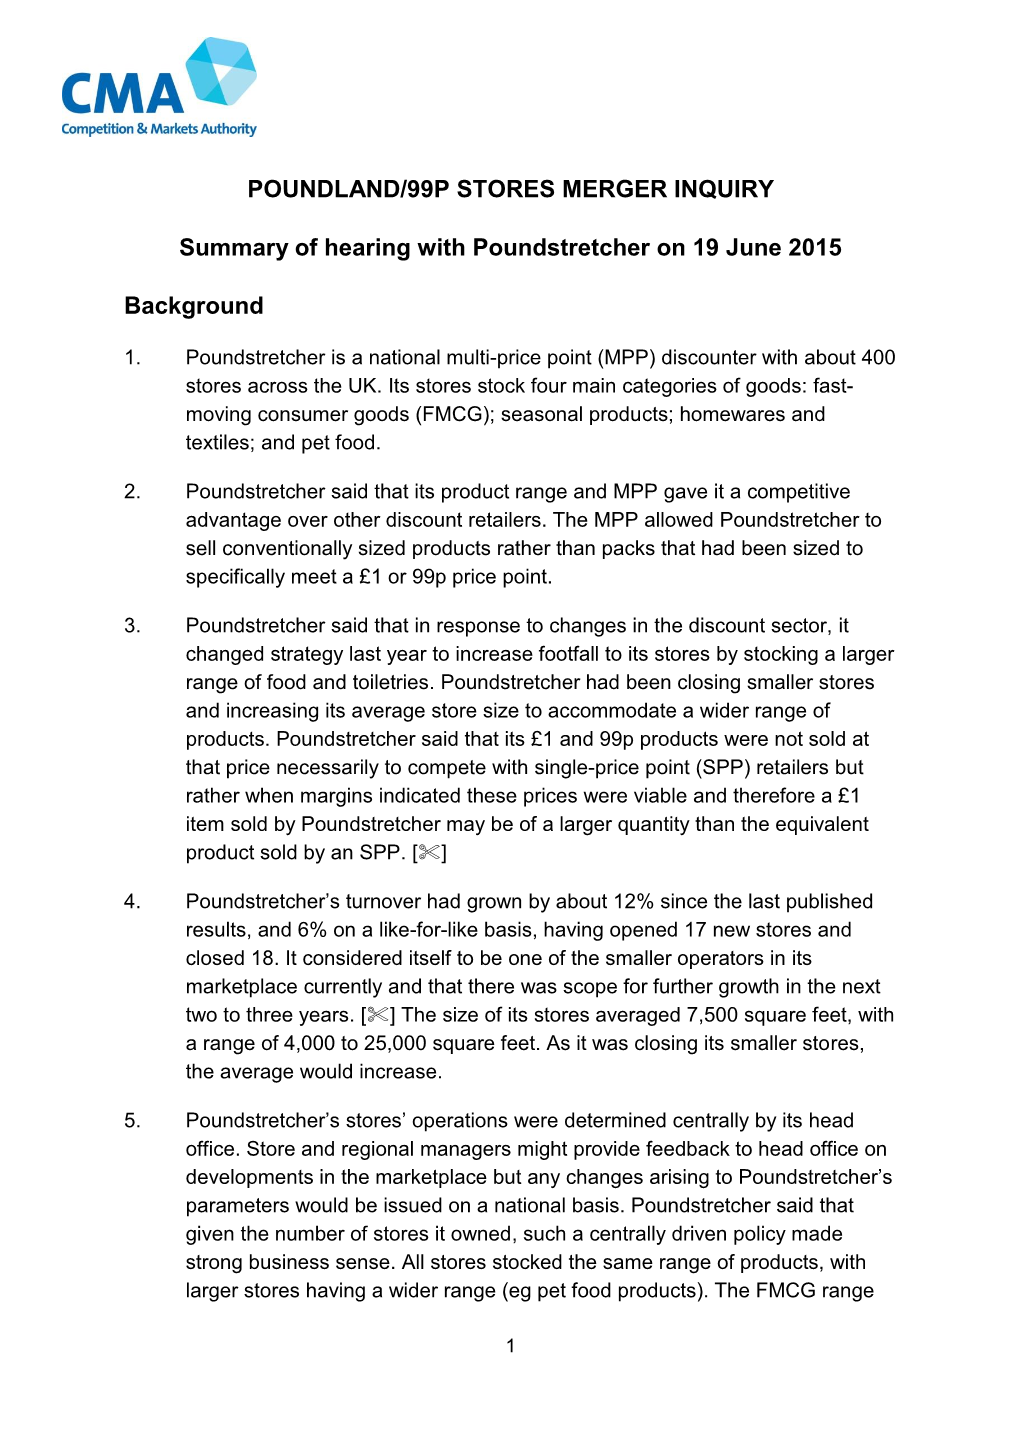 Summary of Hearing with Poundstretcher on 19 June 2015